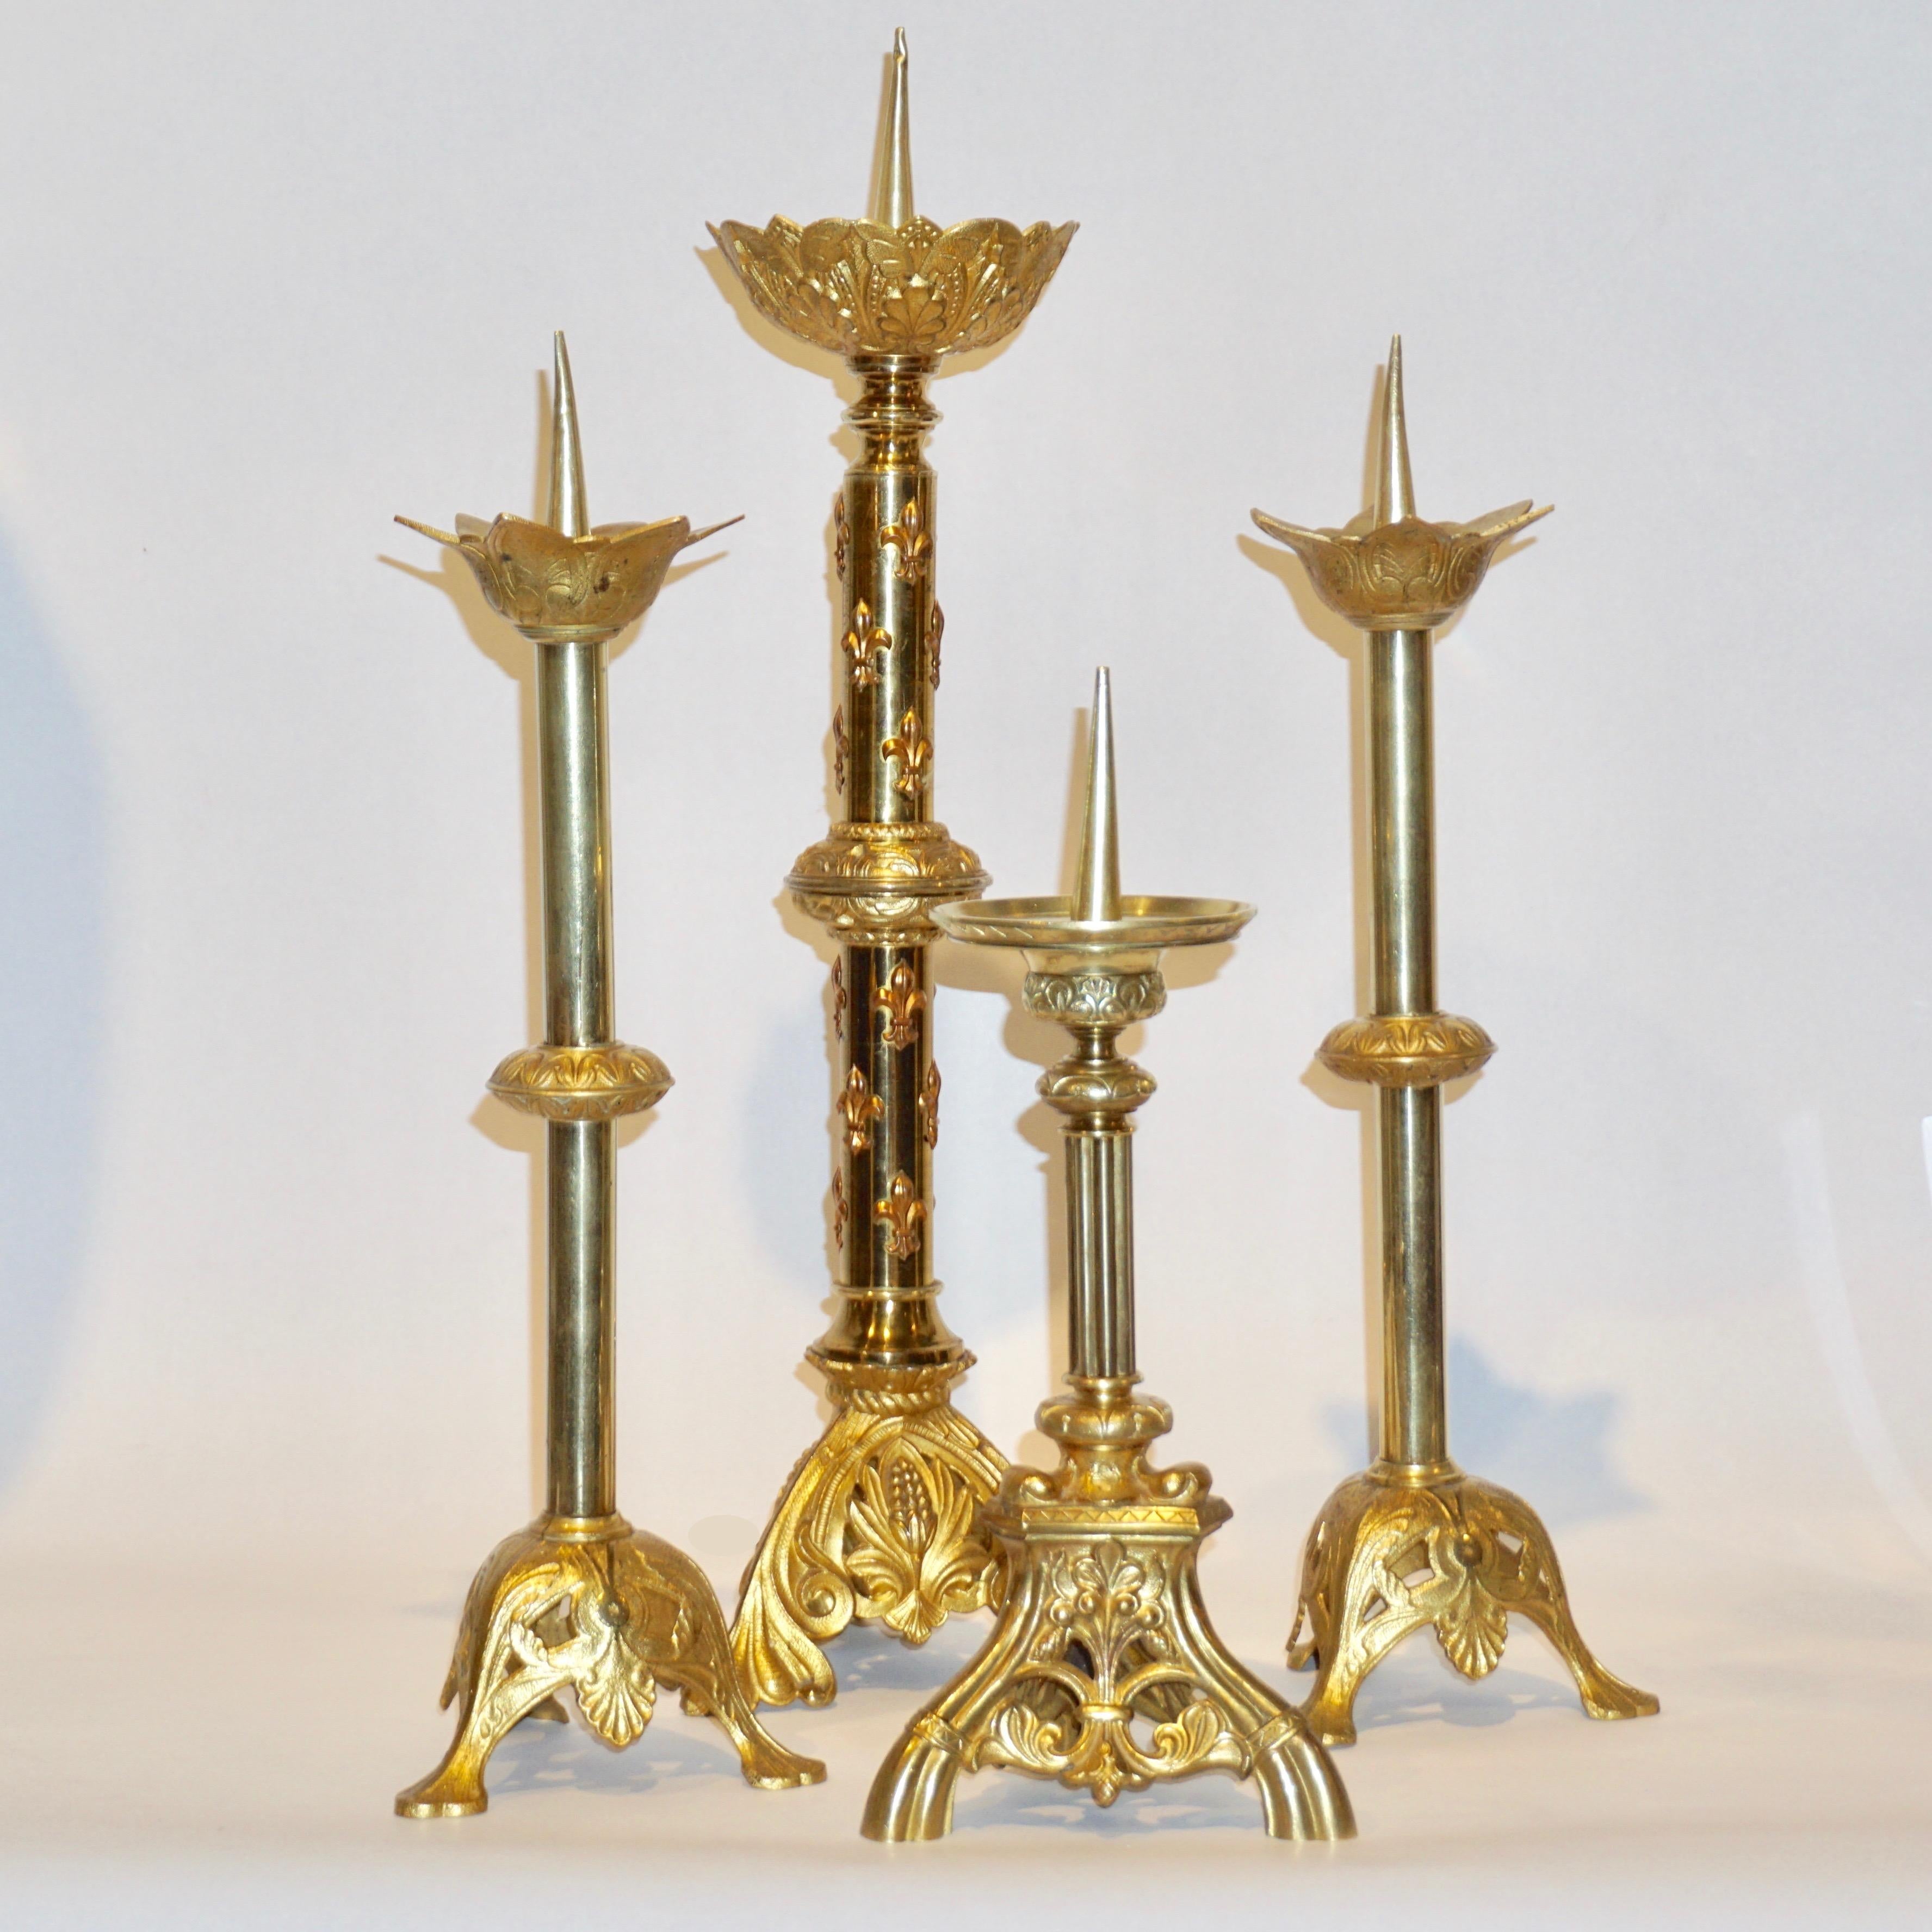 1880s French Baroque Revival Pair of Gilt Bronze Ormolu Pricket Candlesticks For Sale 3